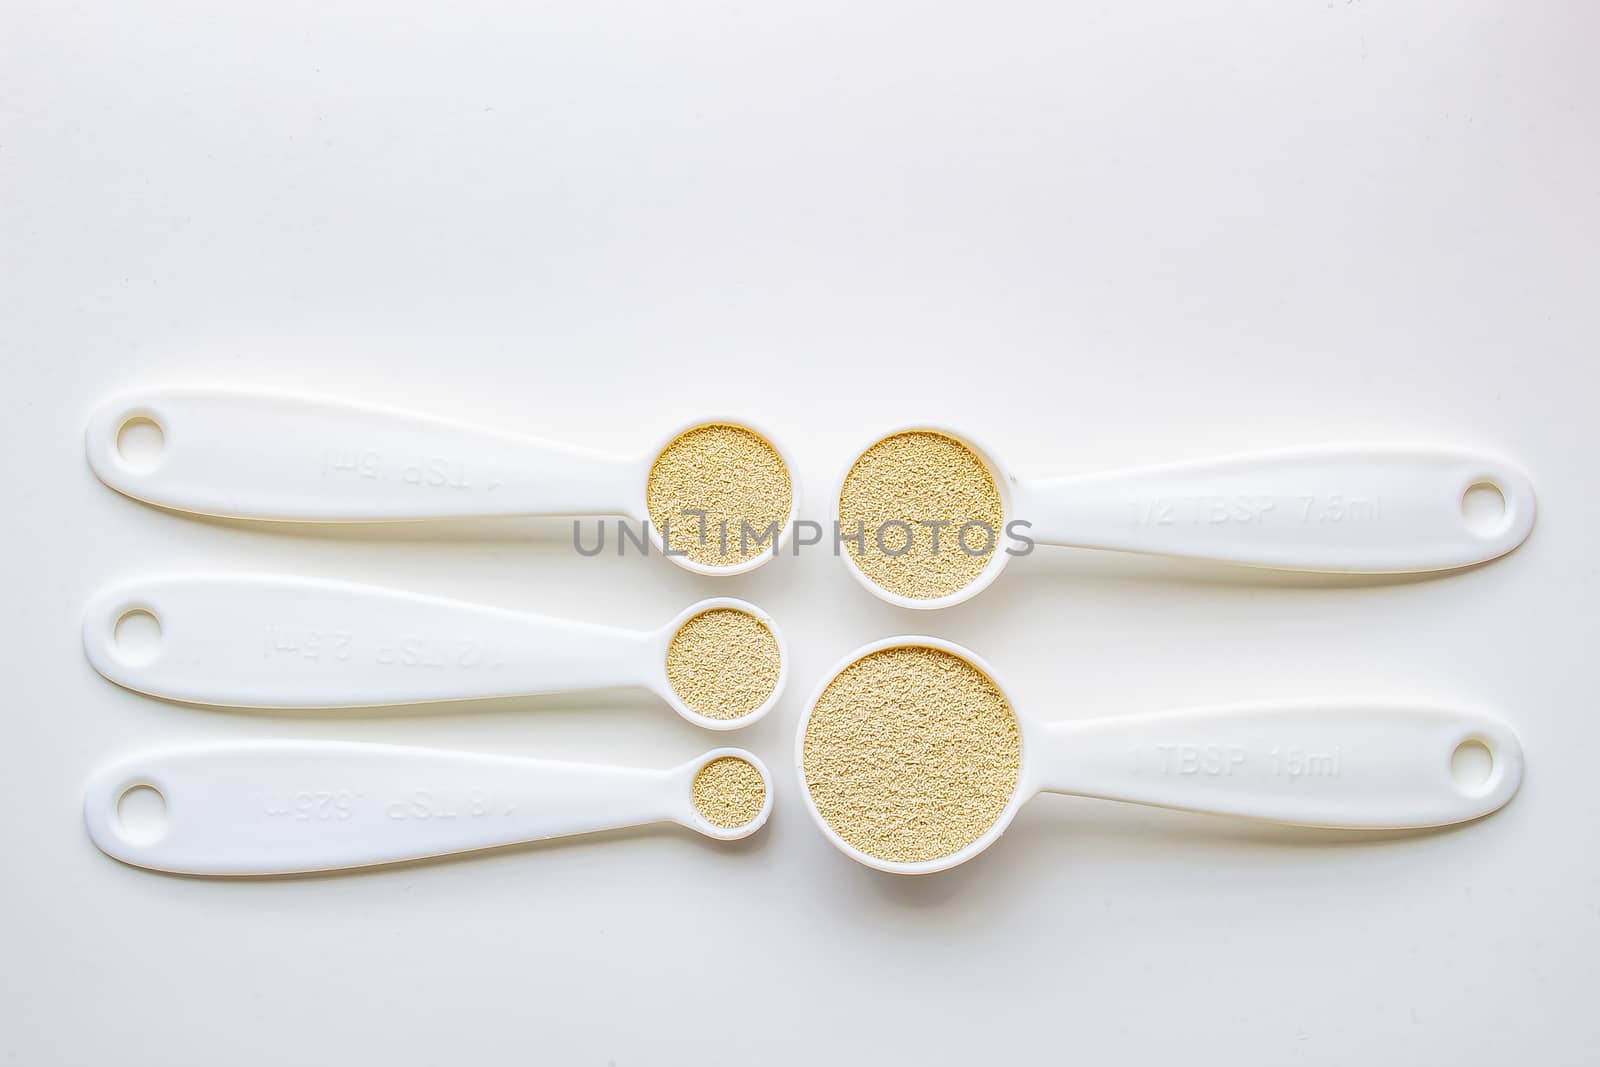 A top general view of some measurement baking spoons with yeast on them by oasisamuel